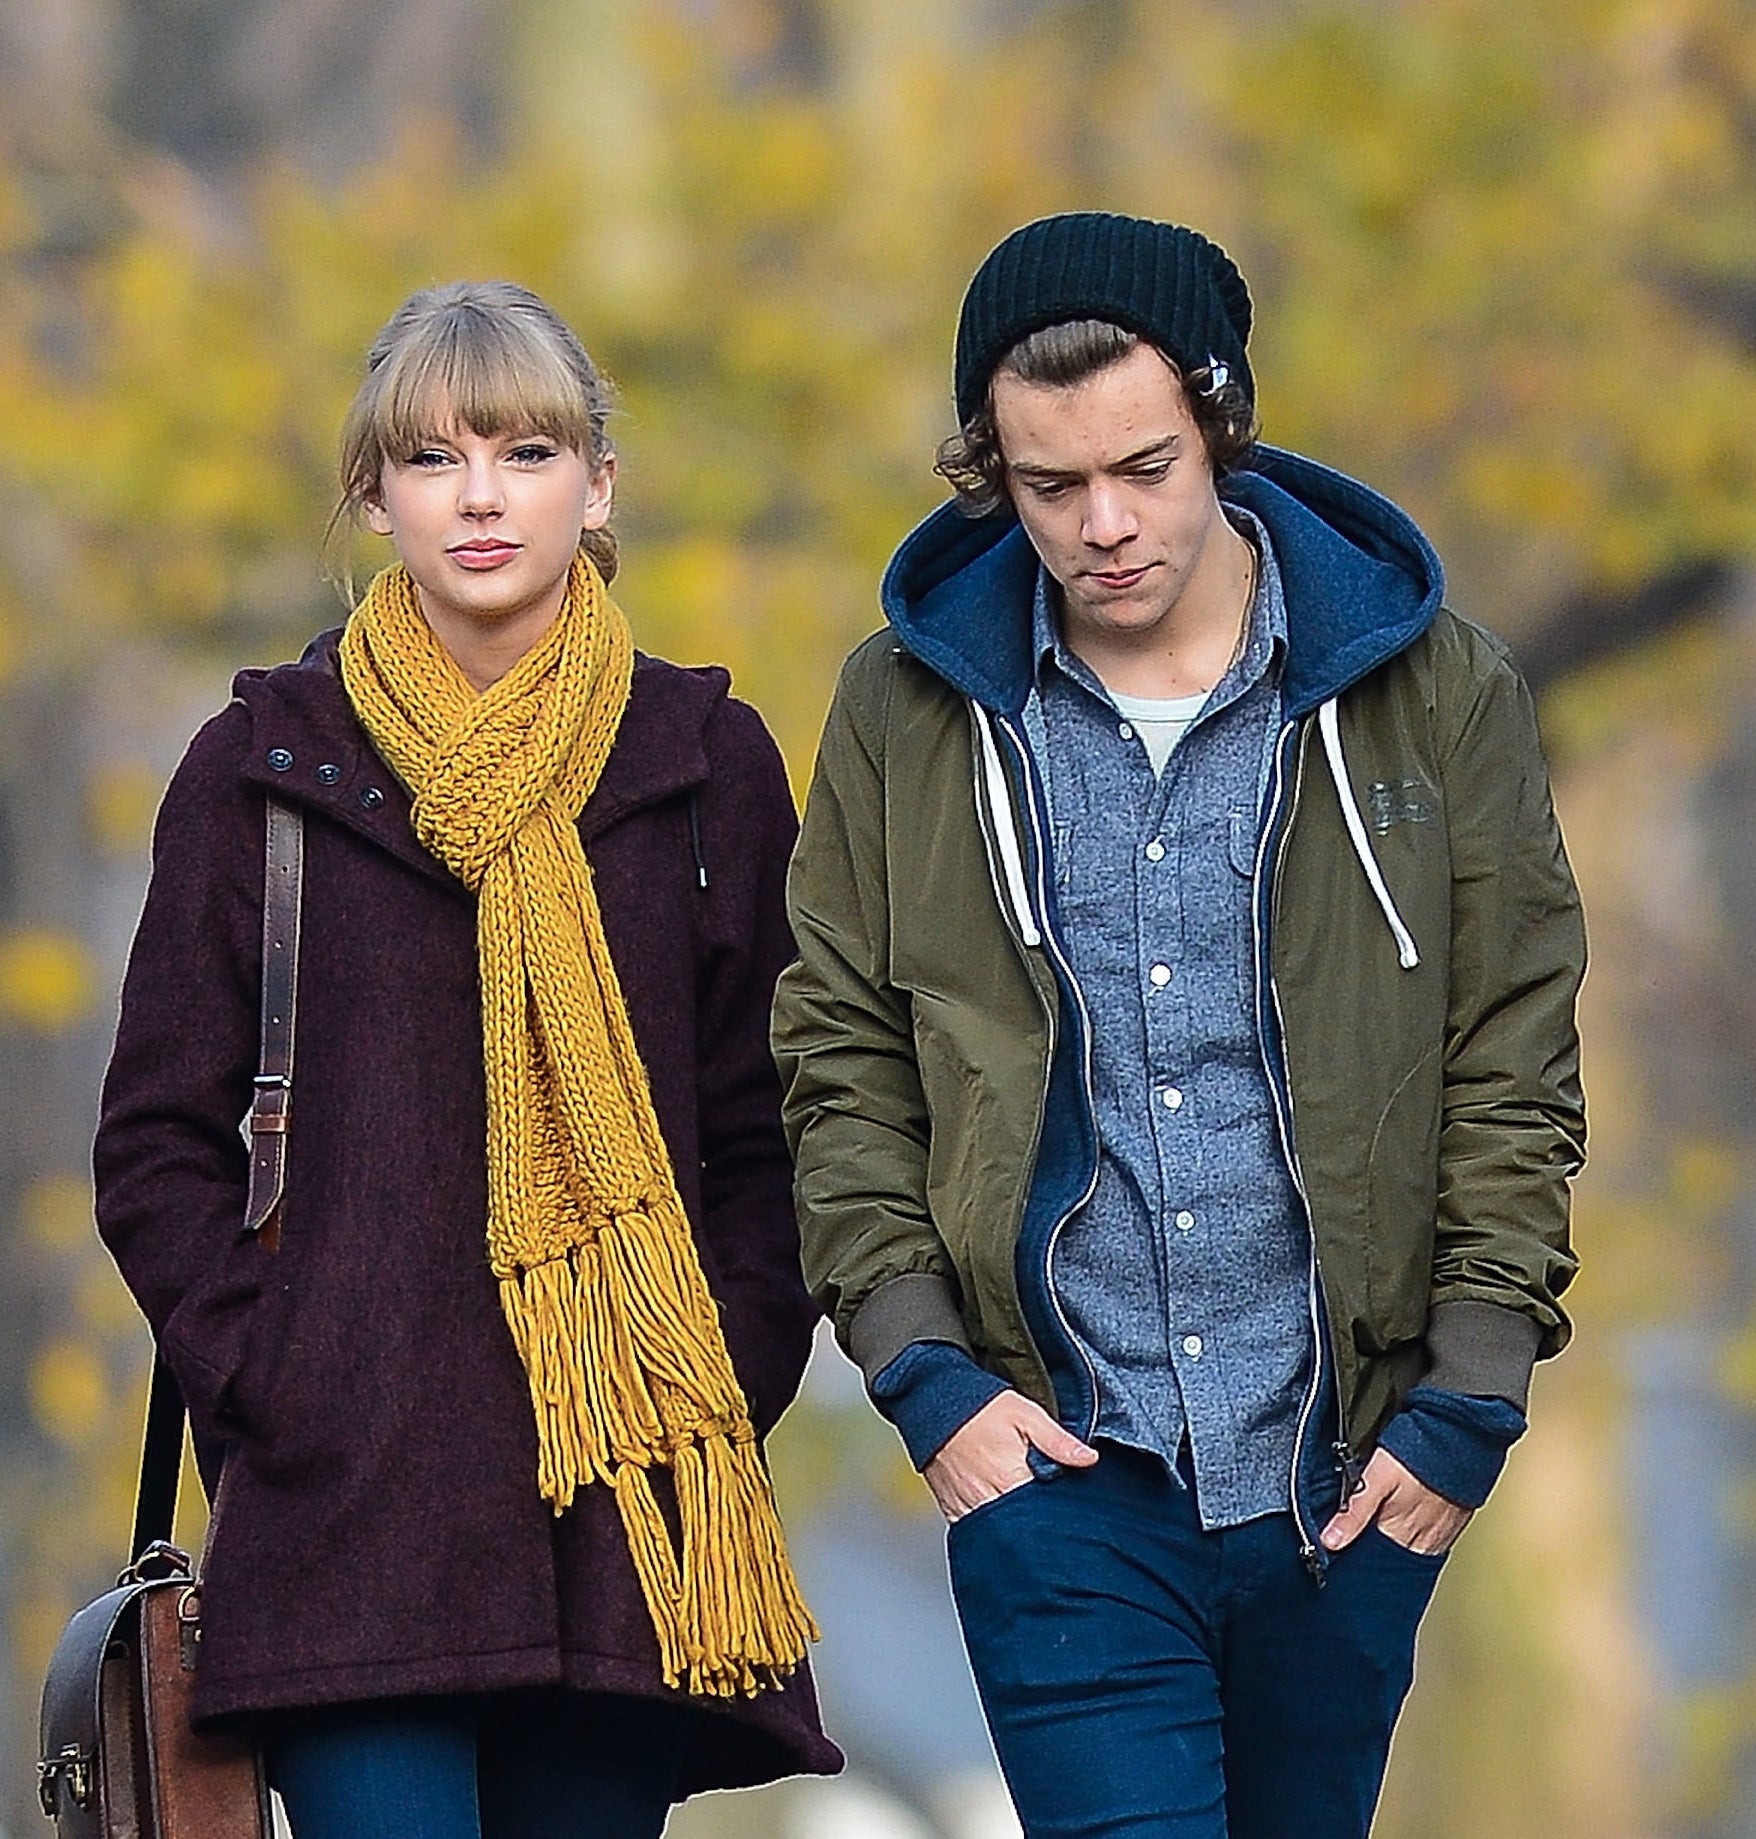 Taylor and Harry taking a walk together outside during colder months